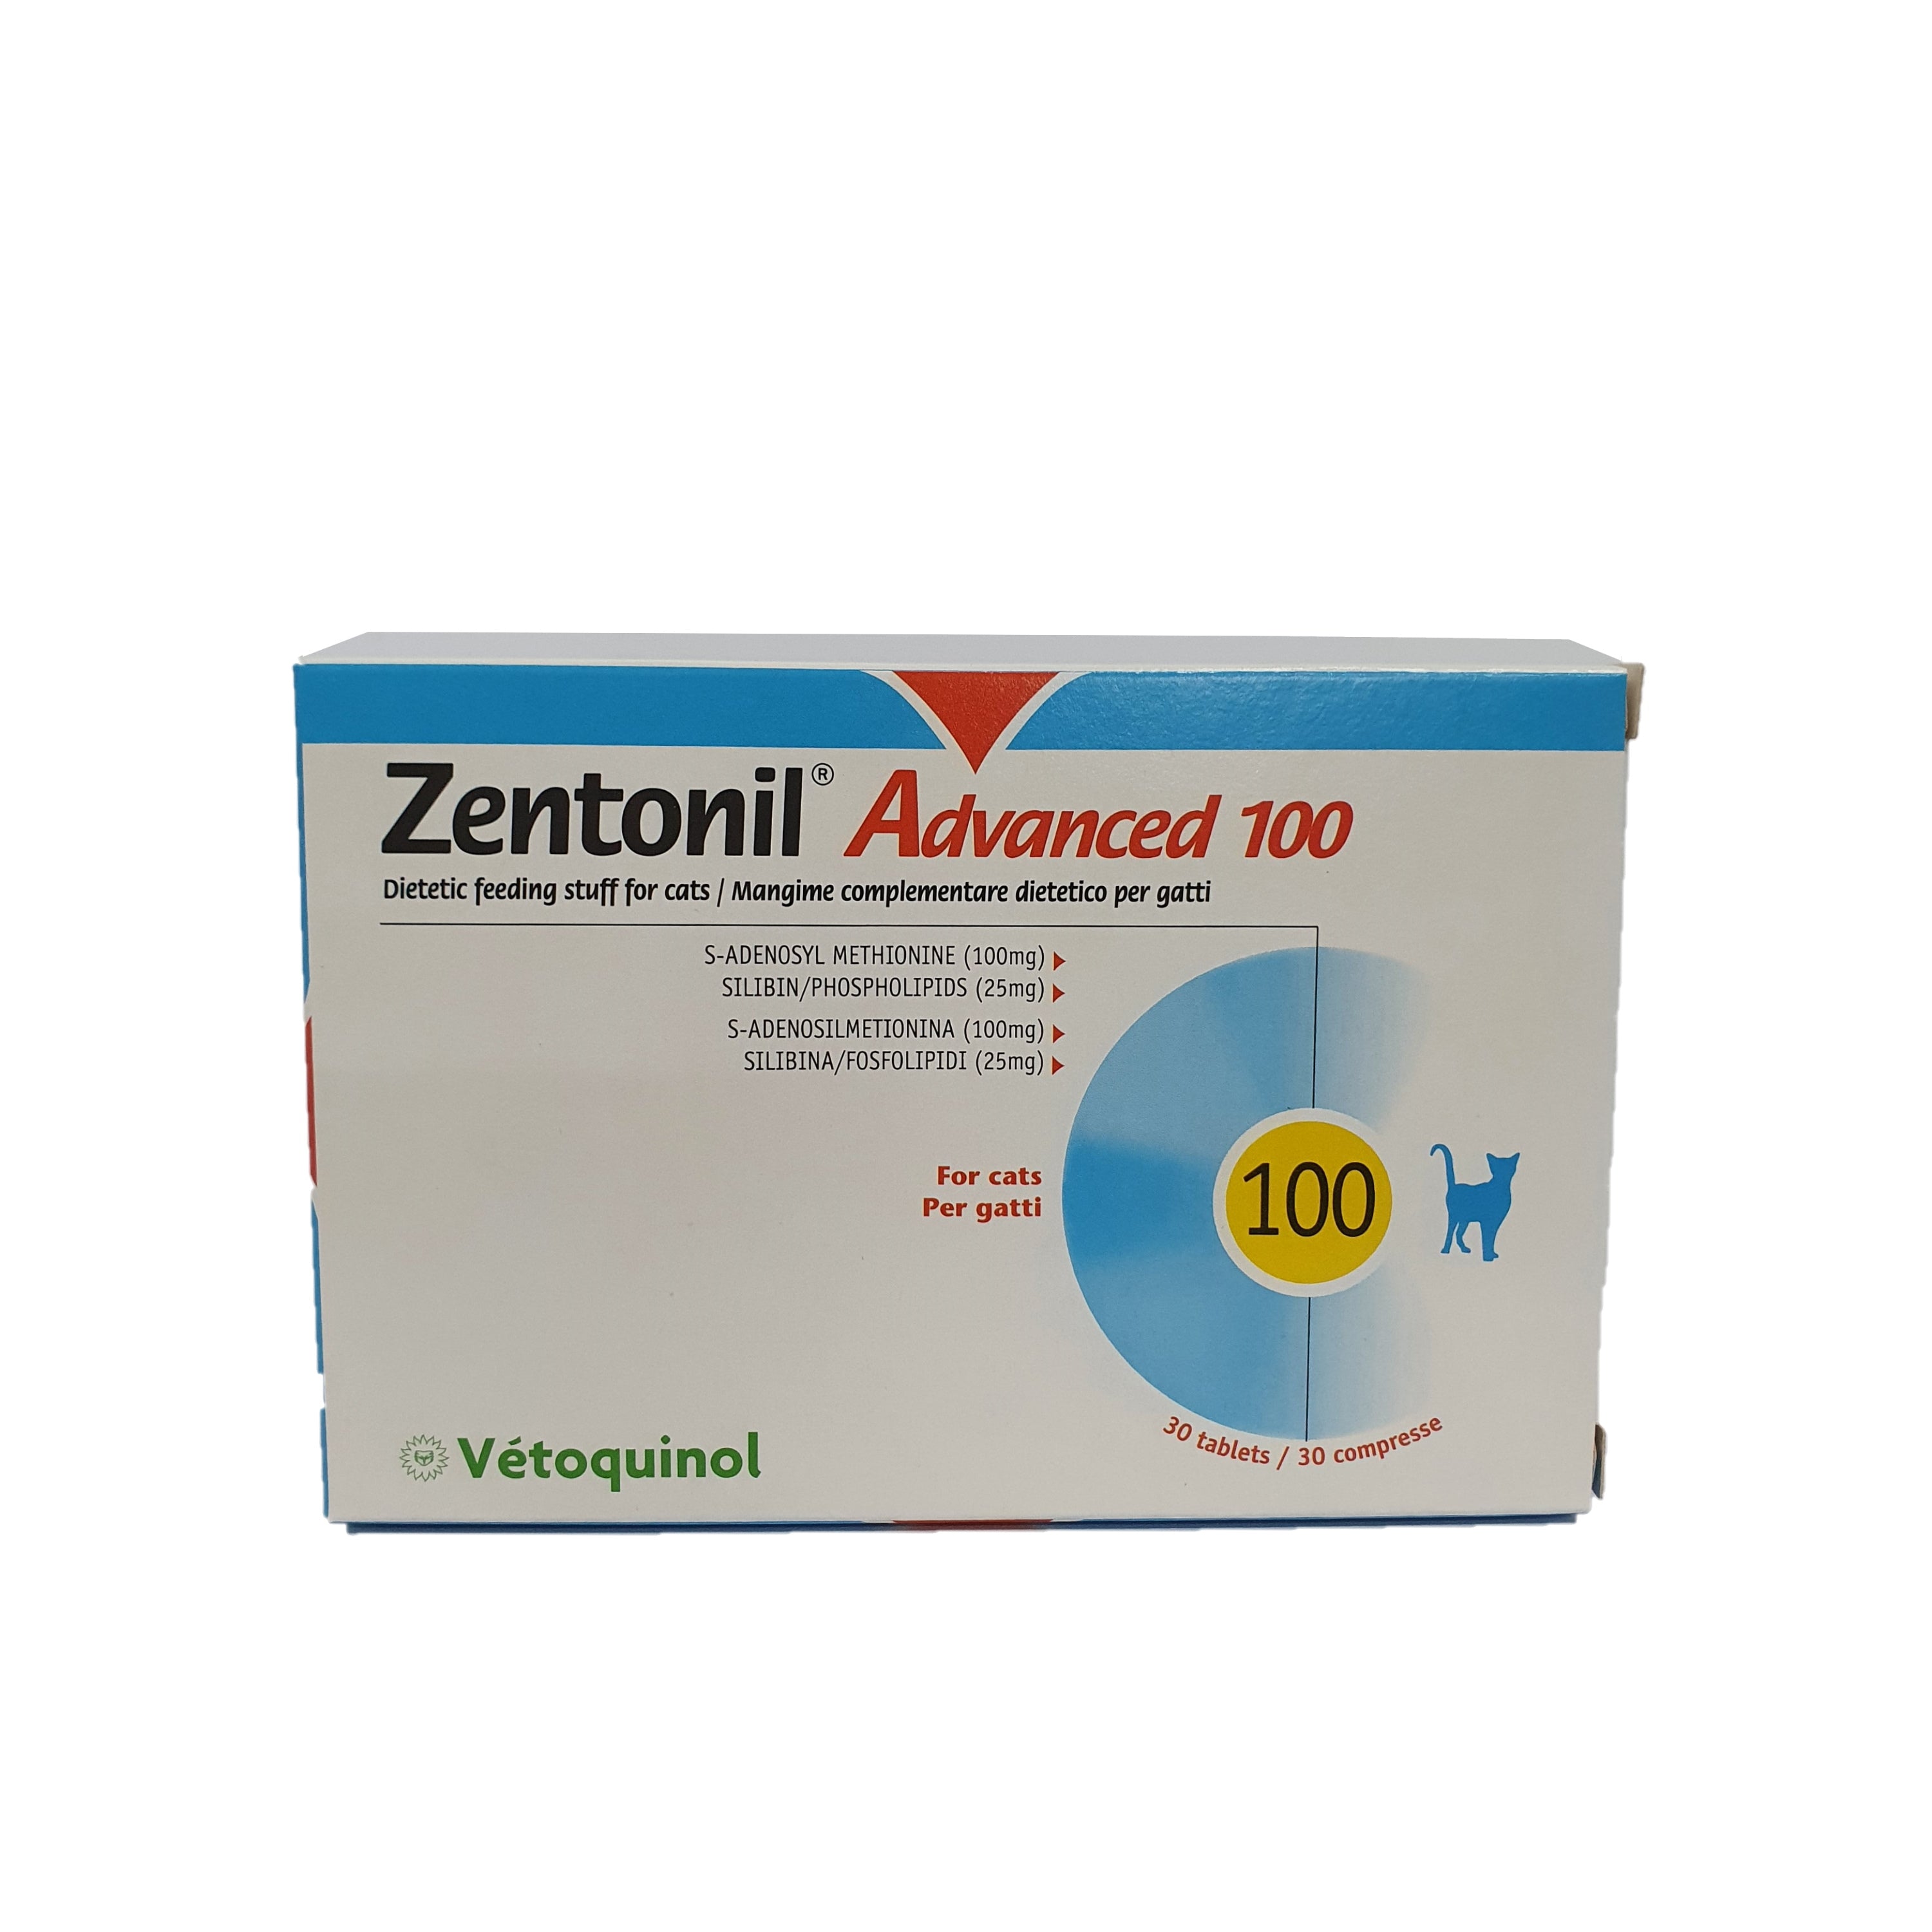 Vetoquinol Zentonil Advanced 100 Liver Function Support for Dogs Cats Pets